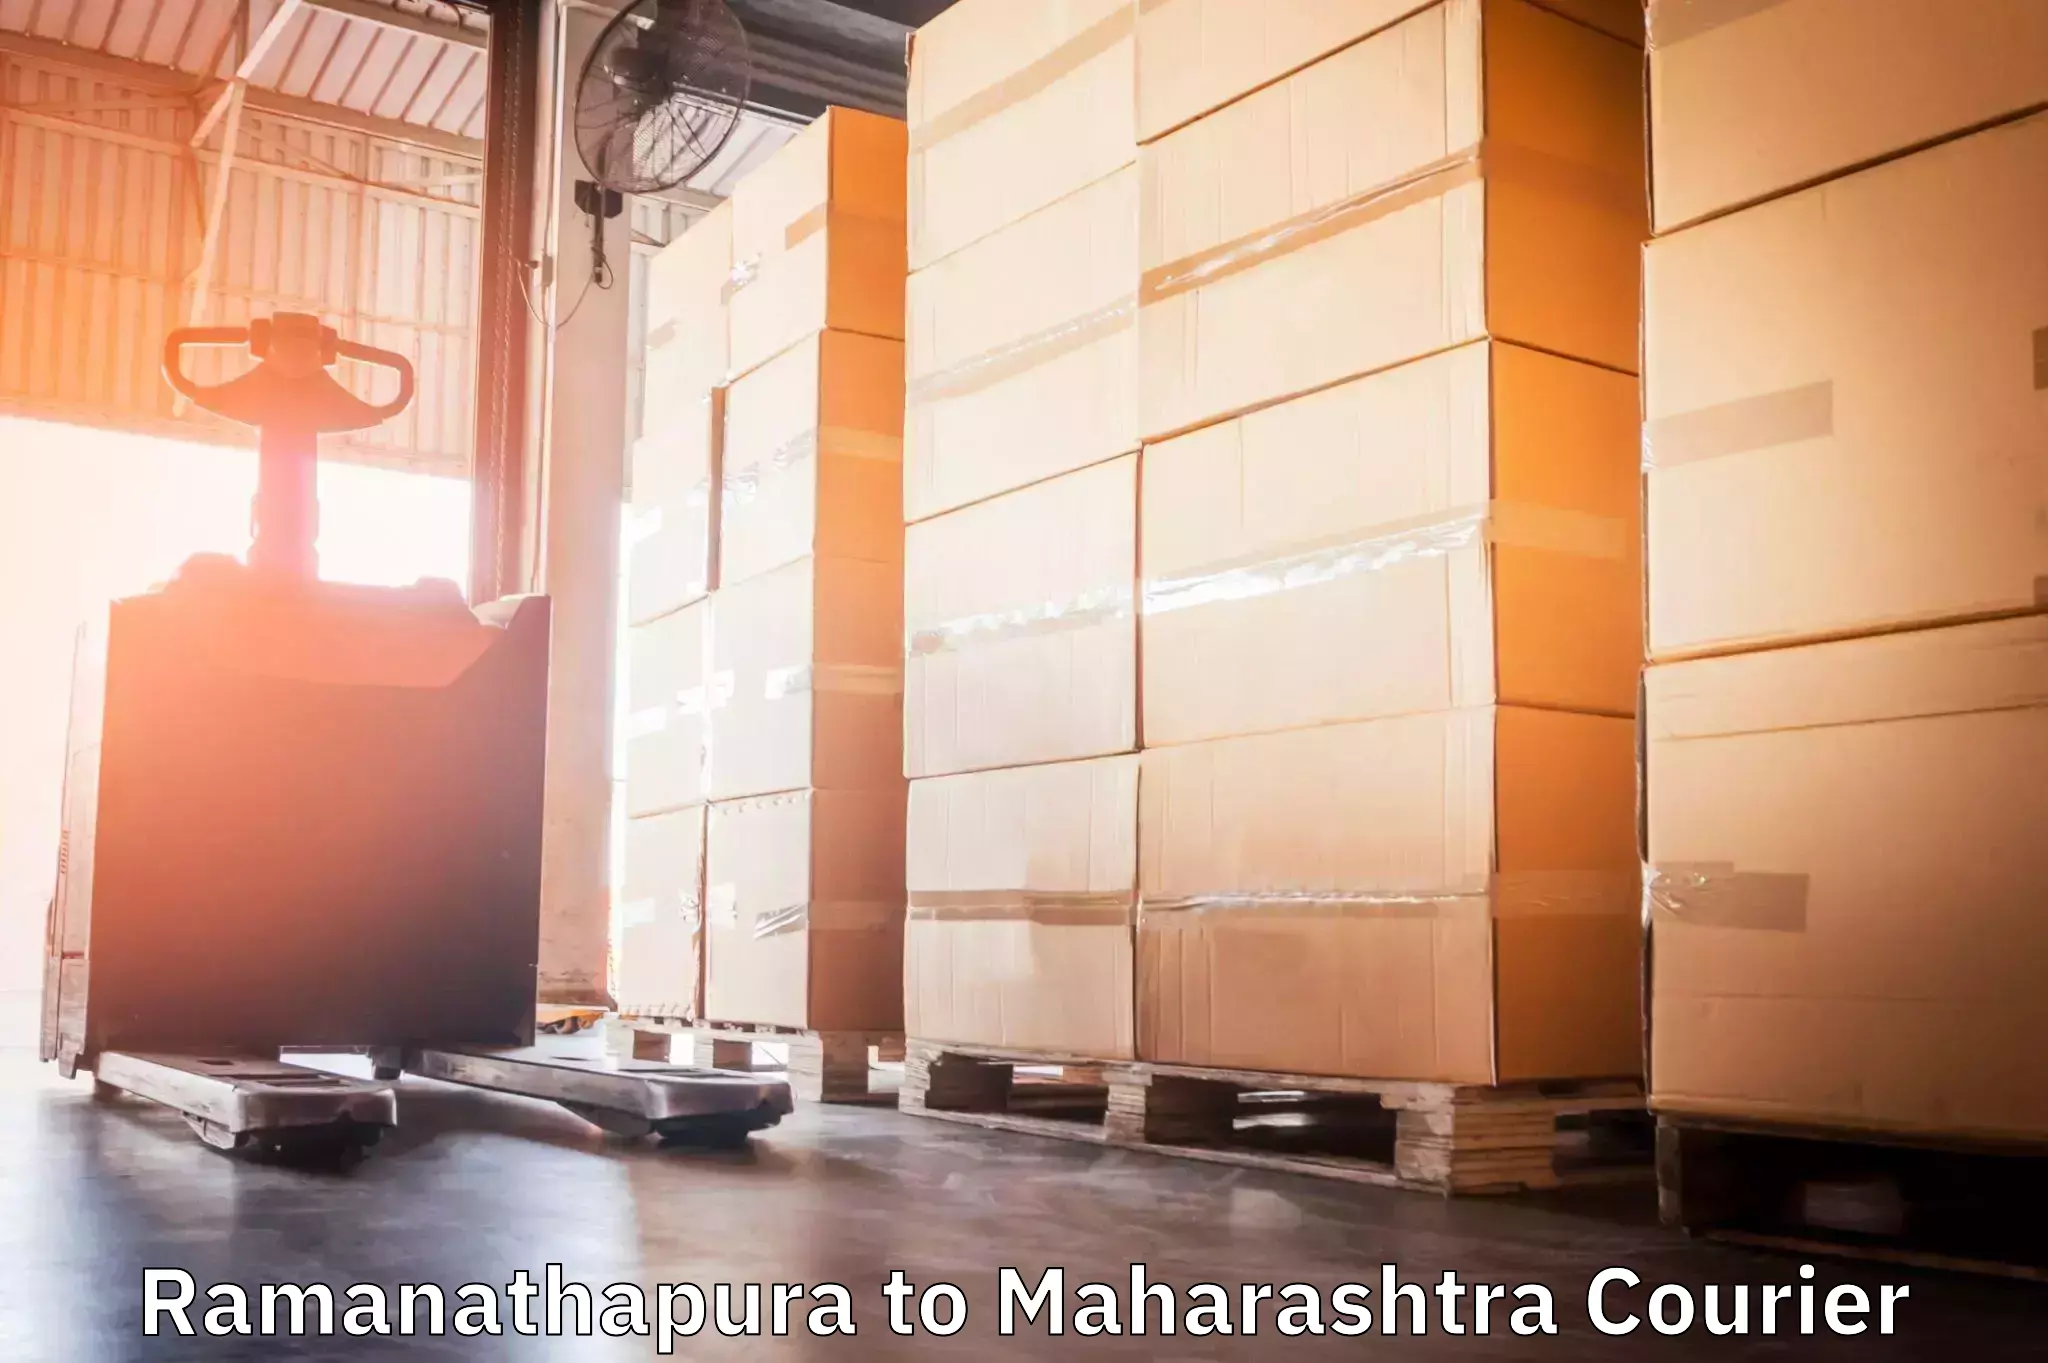 Long distance courier in Ramanathapura to Pimpri Chinchwad